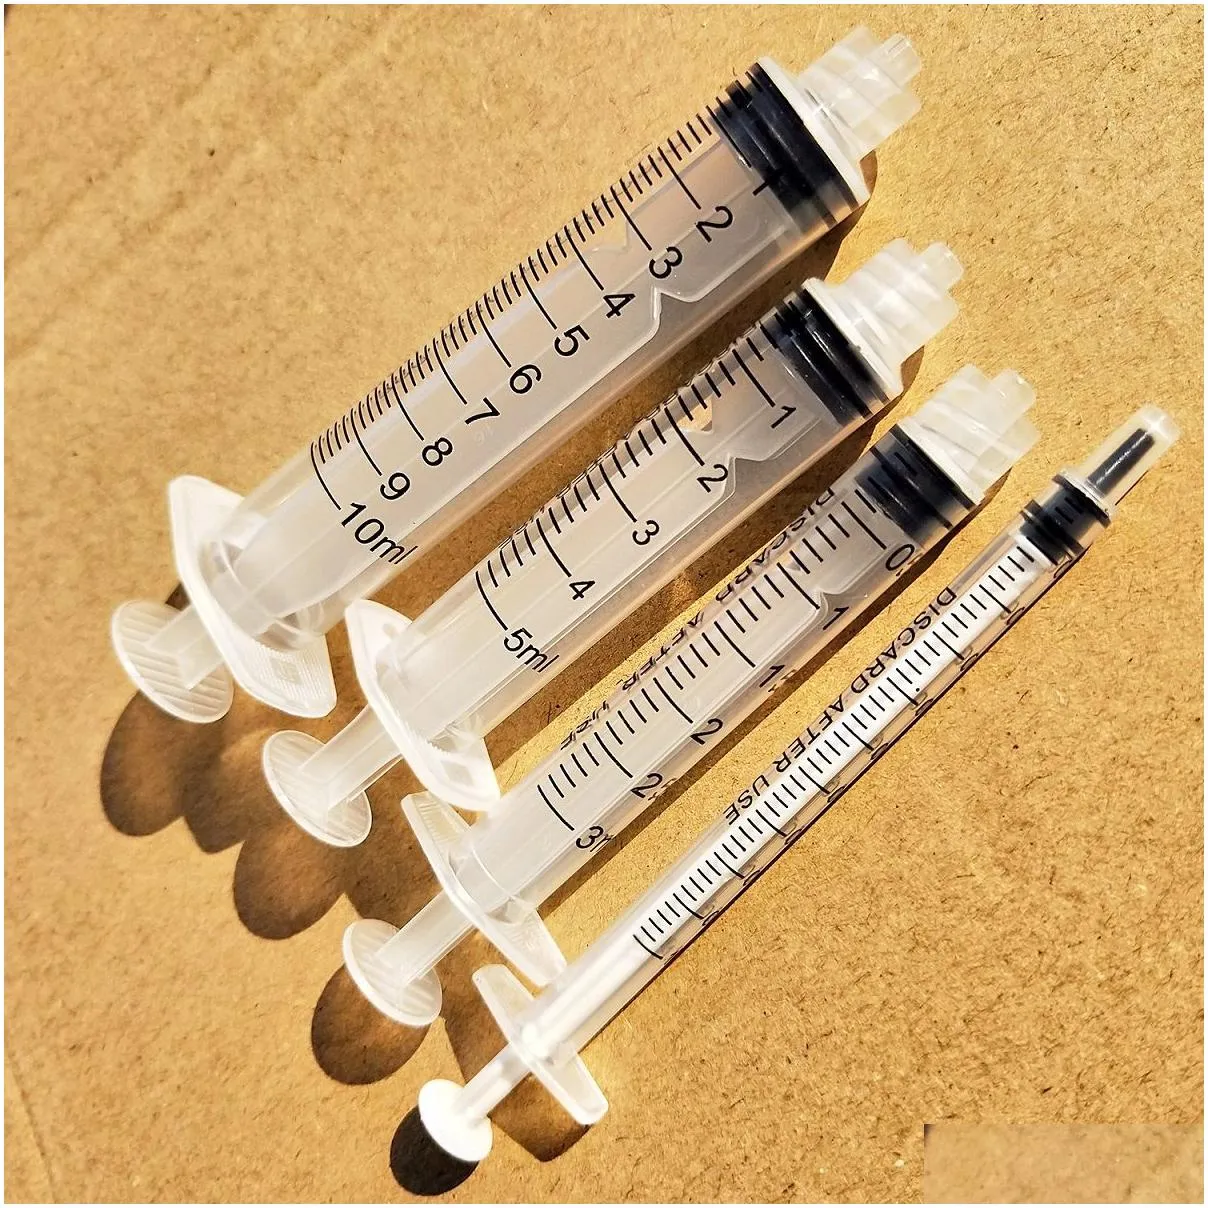 wholesale pack of 50 plastic syringes 1ml 3ml 5ml 10ml for scientific labs and dispensing multiple uses industrial syringe without